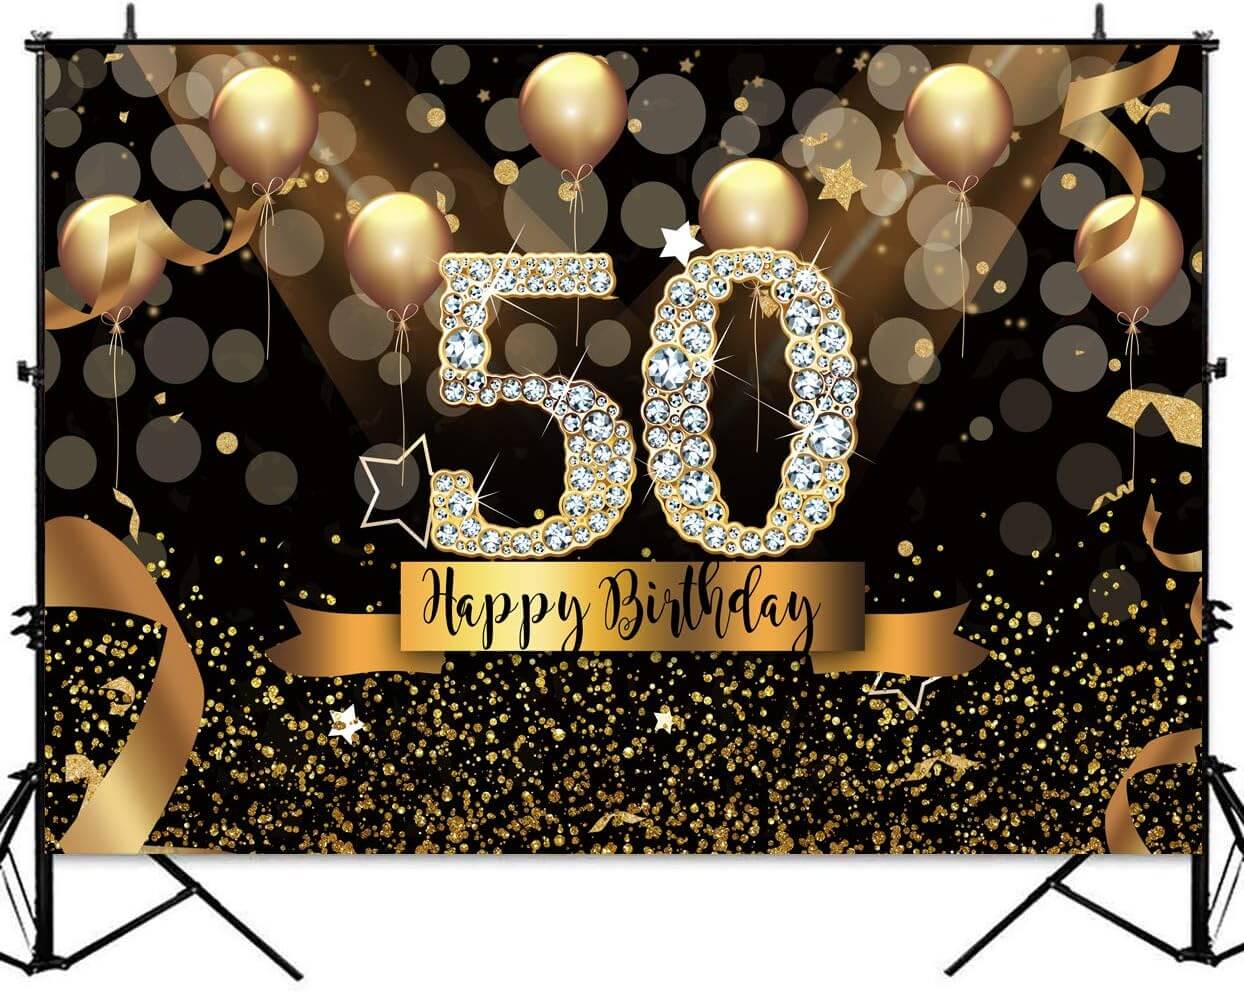 Glitter Black And Gold Balloons Background For Woman Fabulous 50 Birthday Party Decorations Backdrop